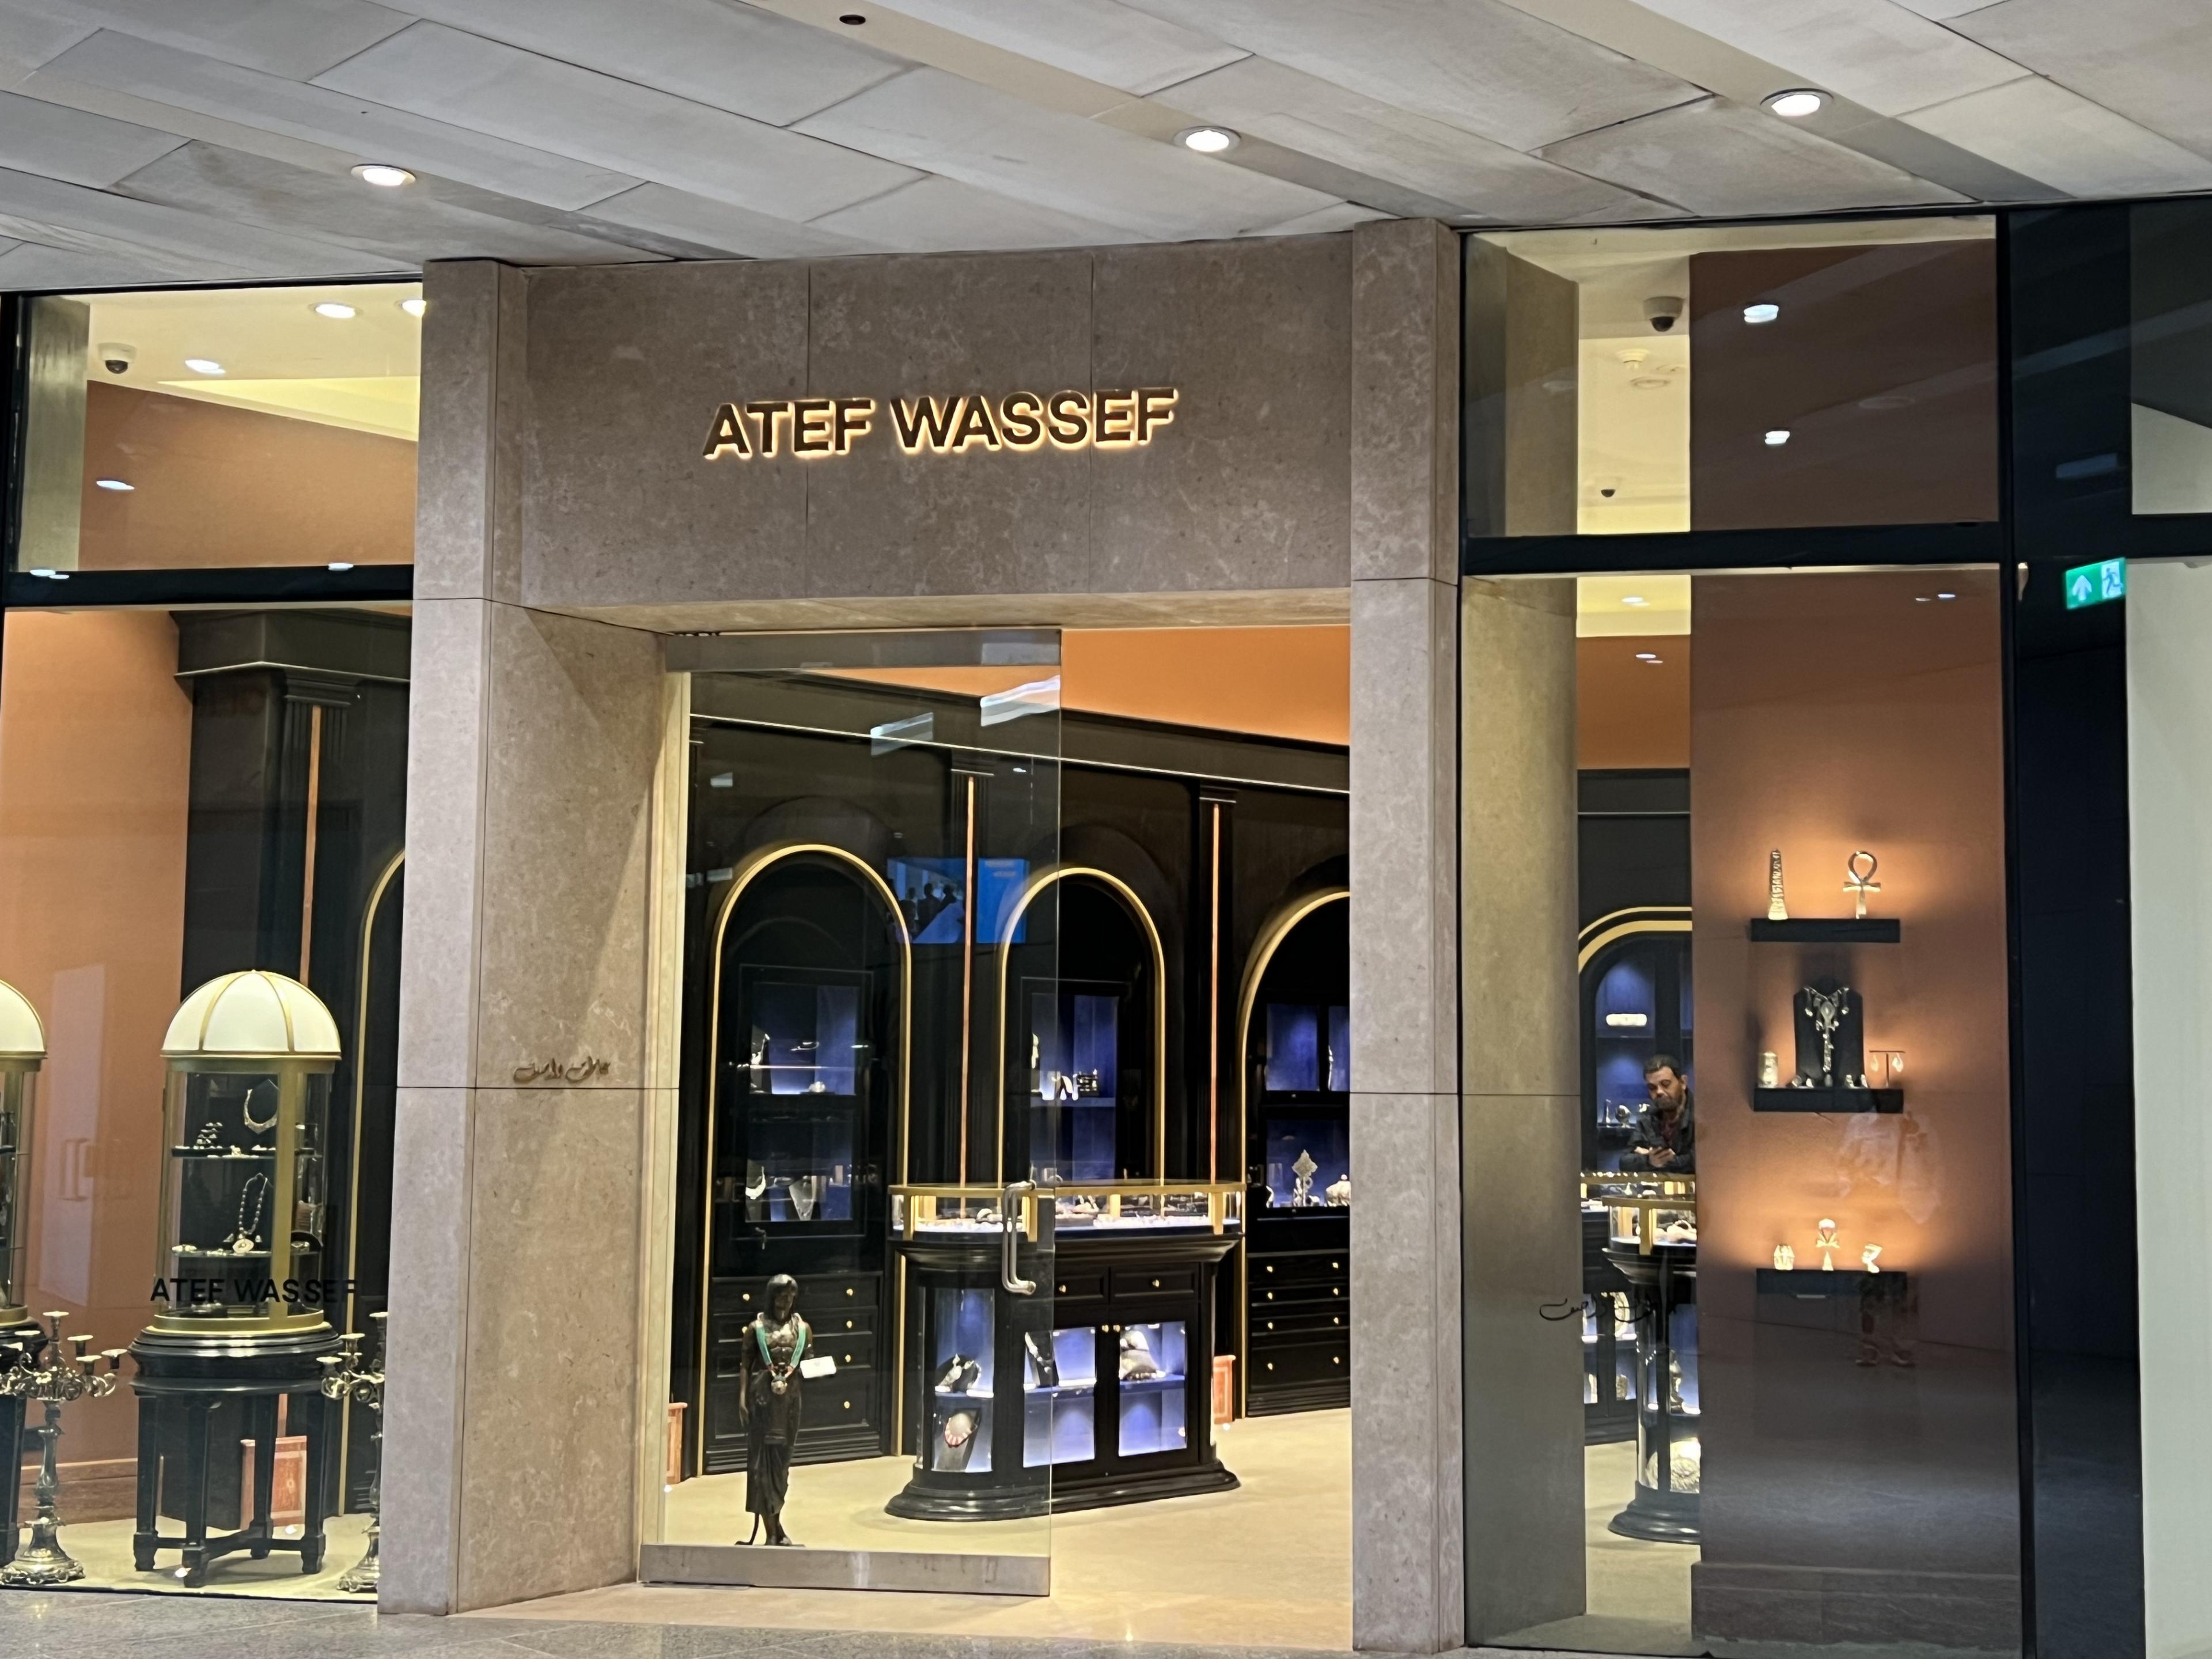 Atef Wassef storefront with glass windows and doors looking into store with black shelving on the walls and black display cases on the floor 